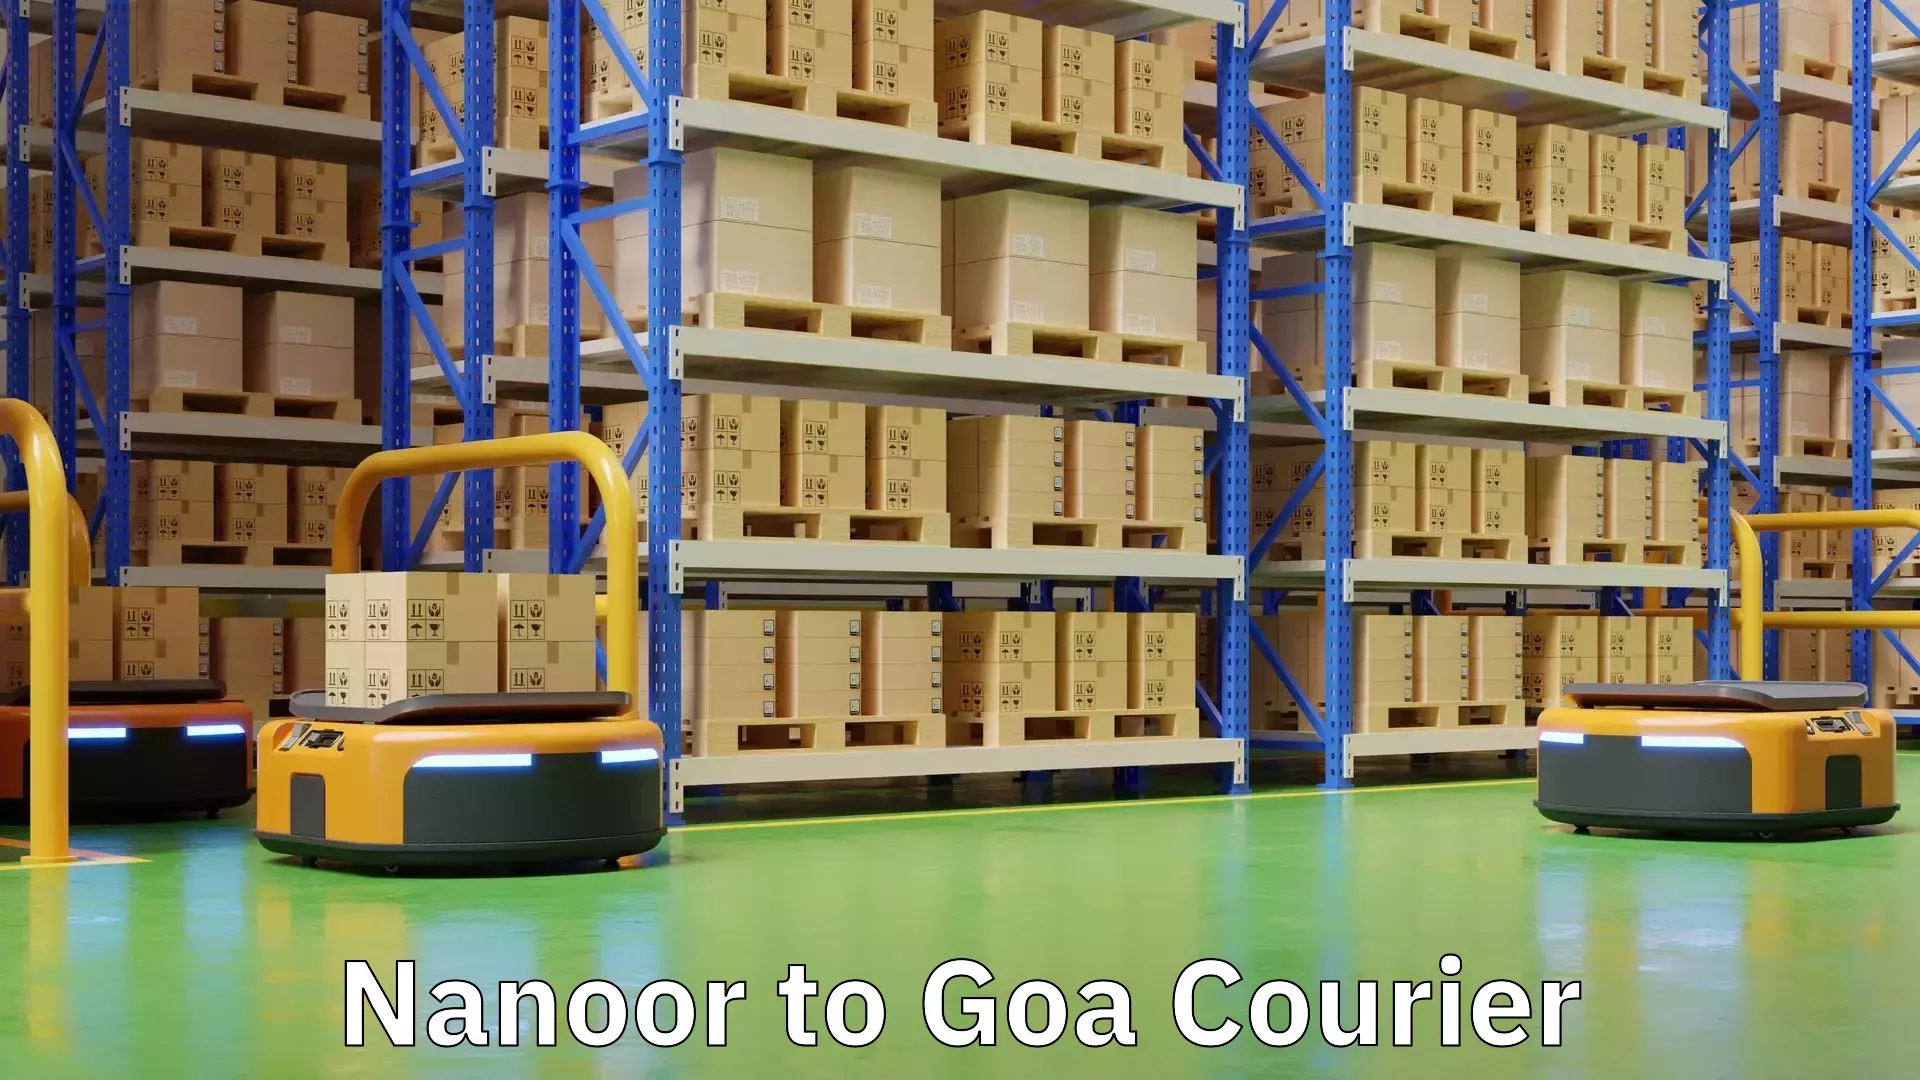 Package delivery network Nanoor to Goa